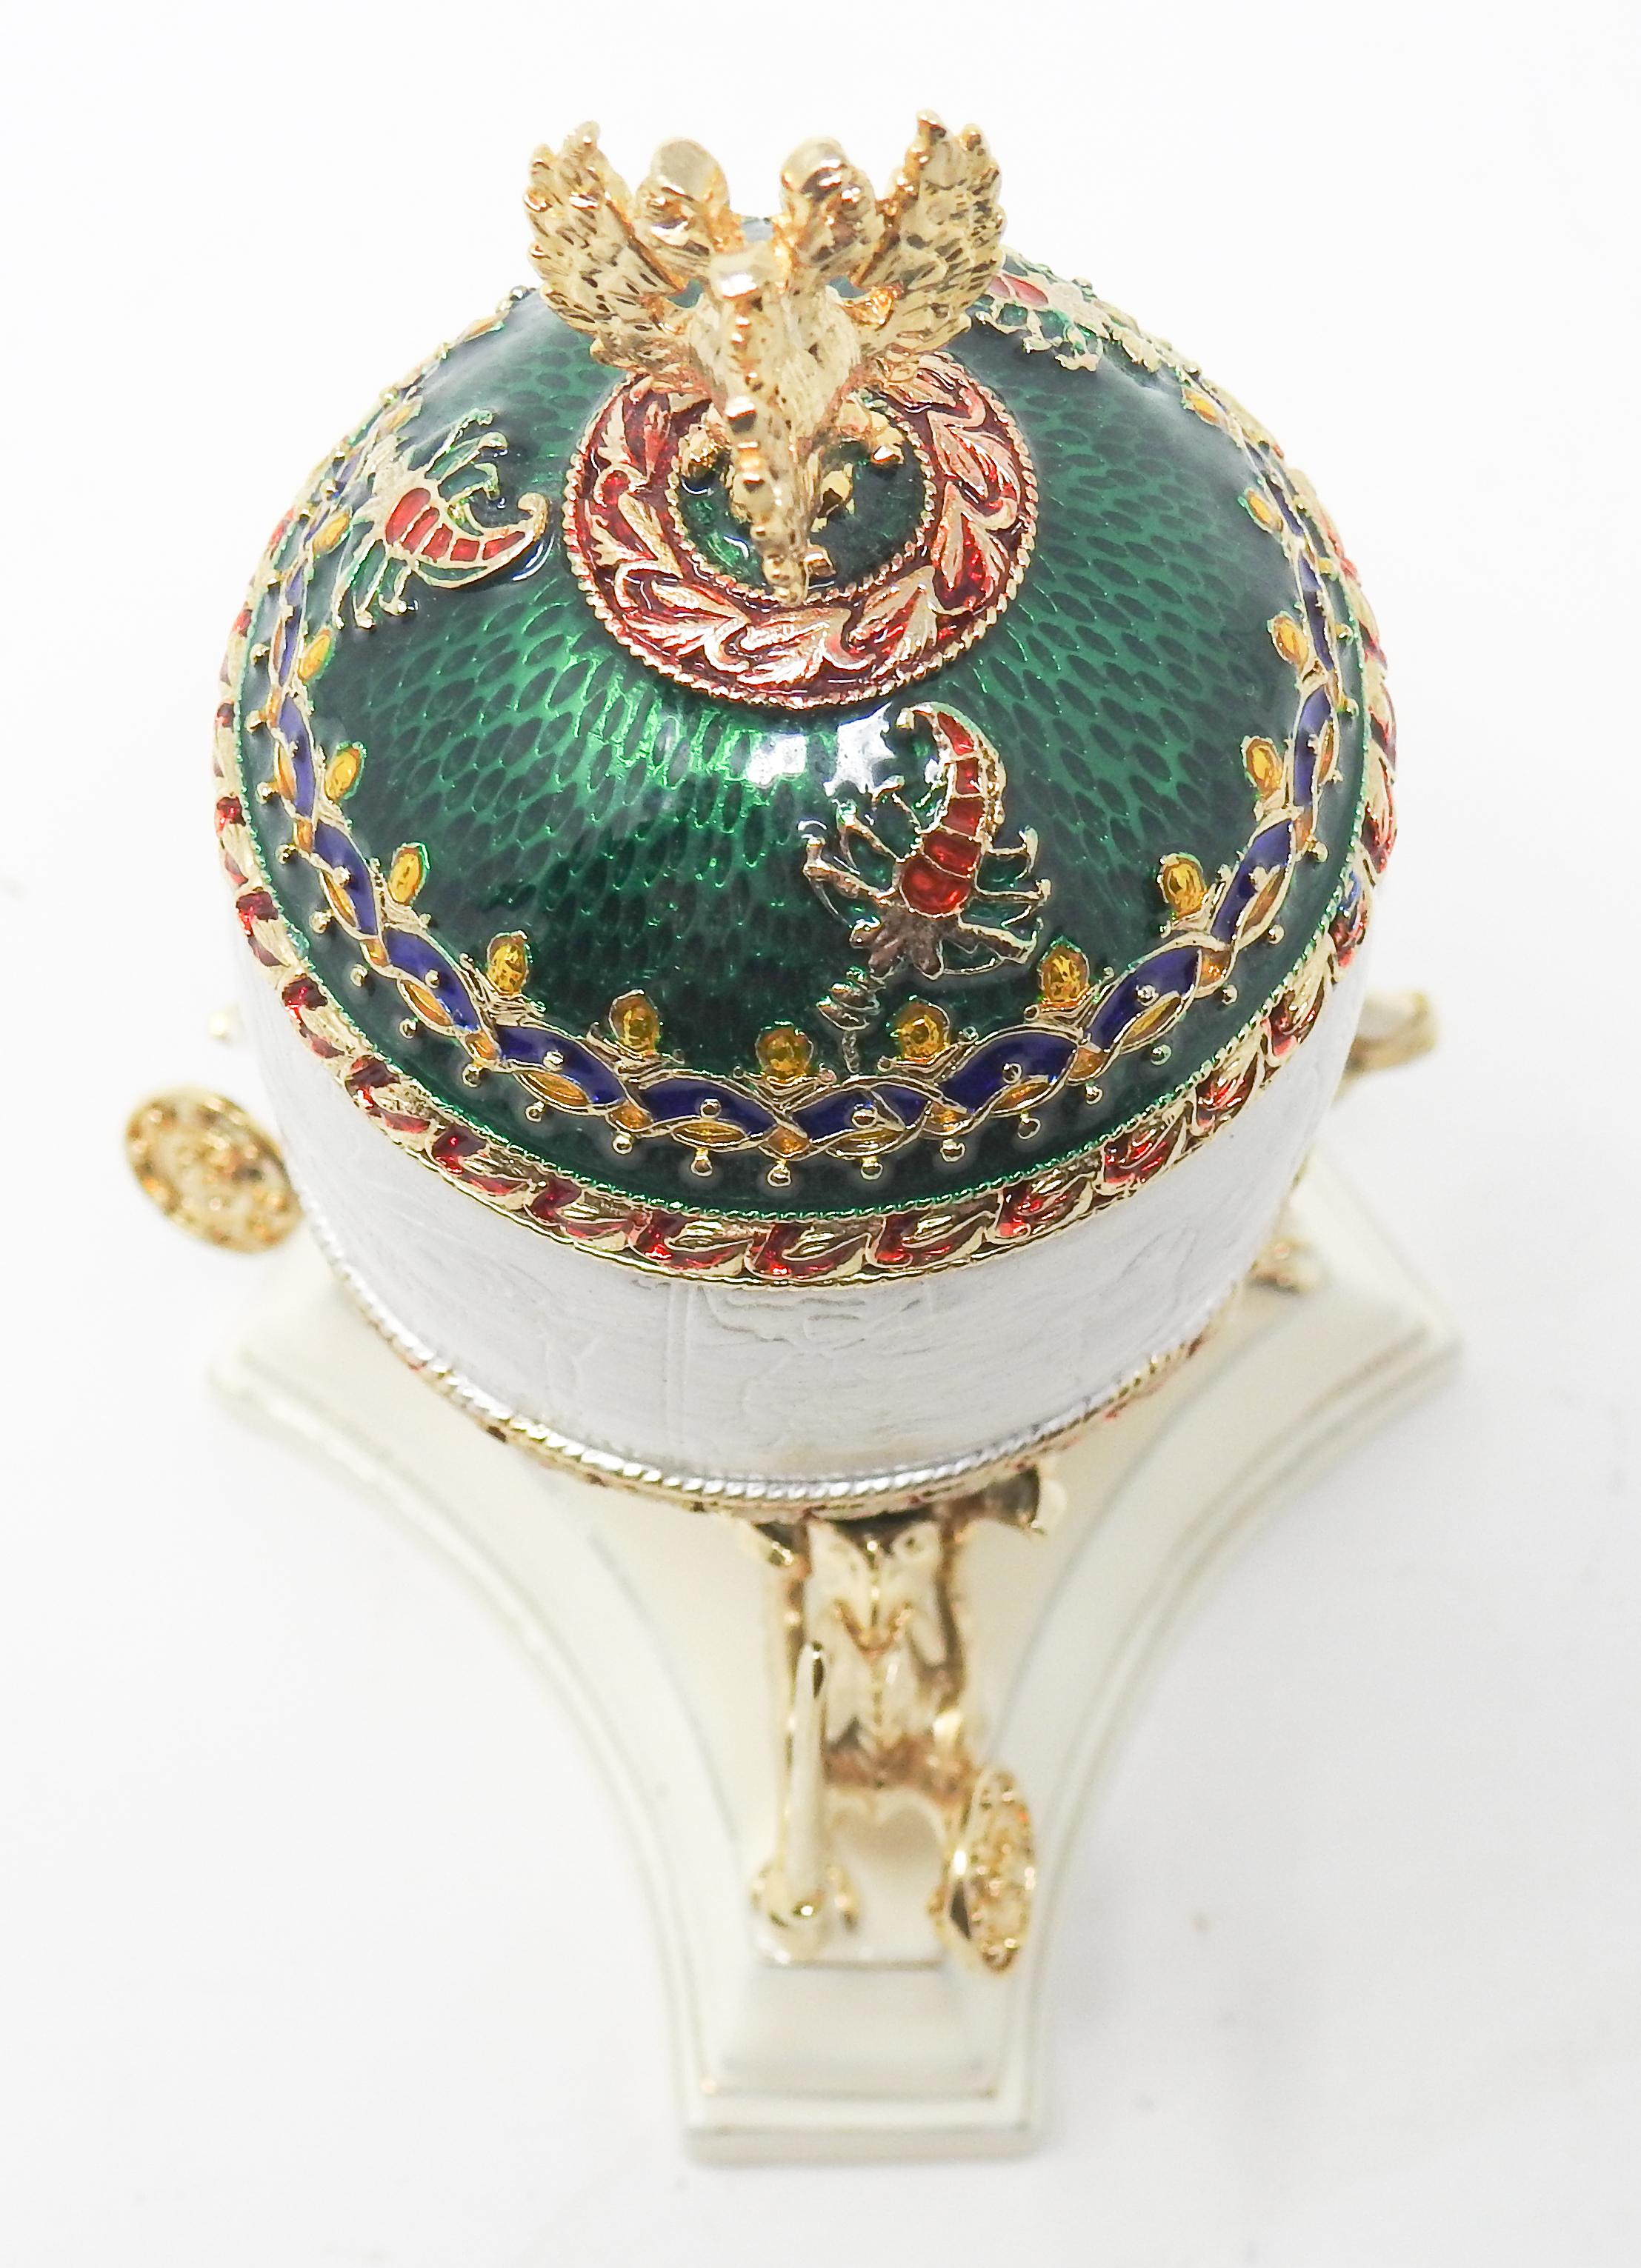 20th Century Faberge Style Egg For Sale